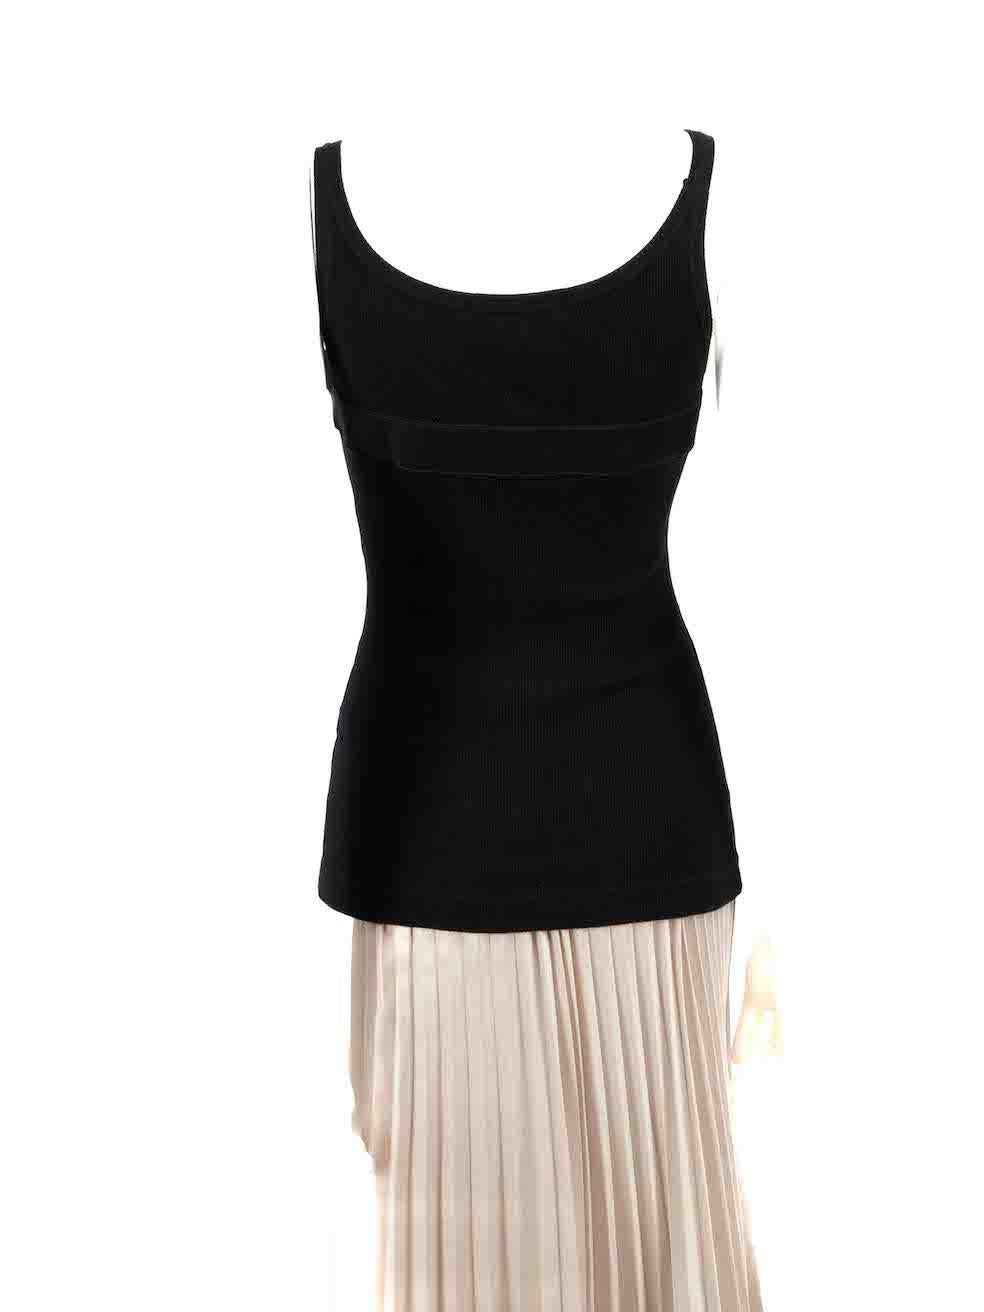 Dolce & Gabbana Black Bow Accent Tank Top Size S In Good Condition In London, GB